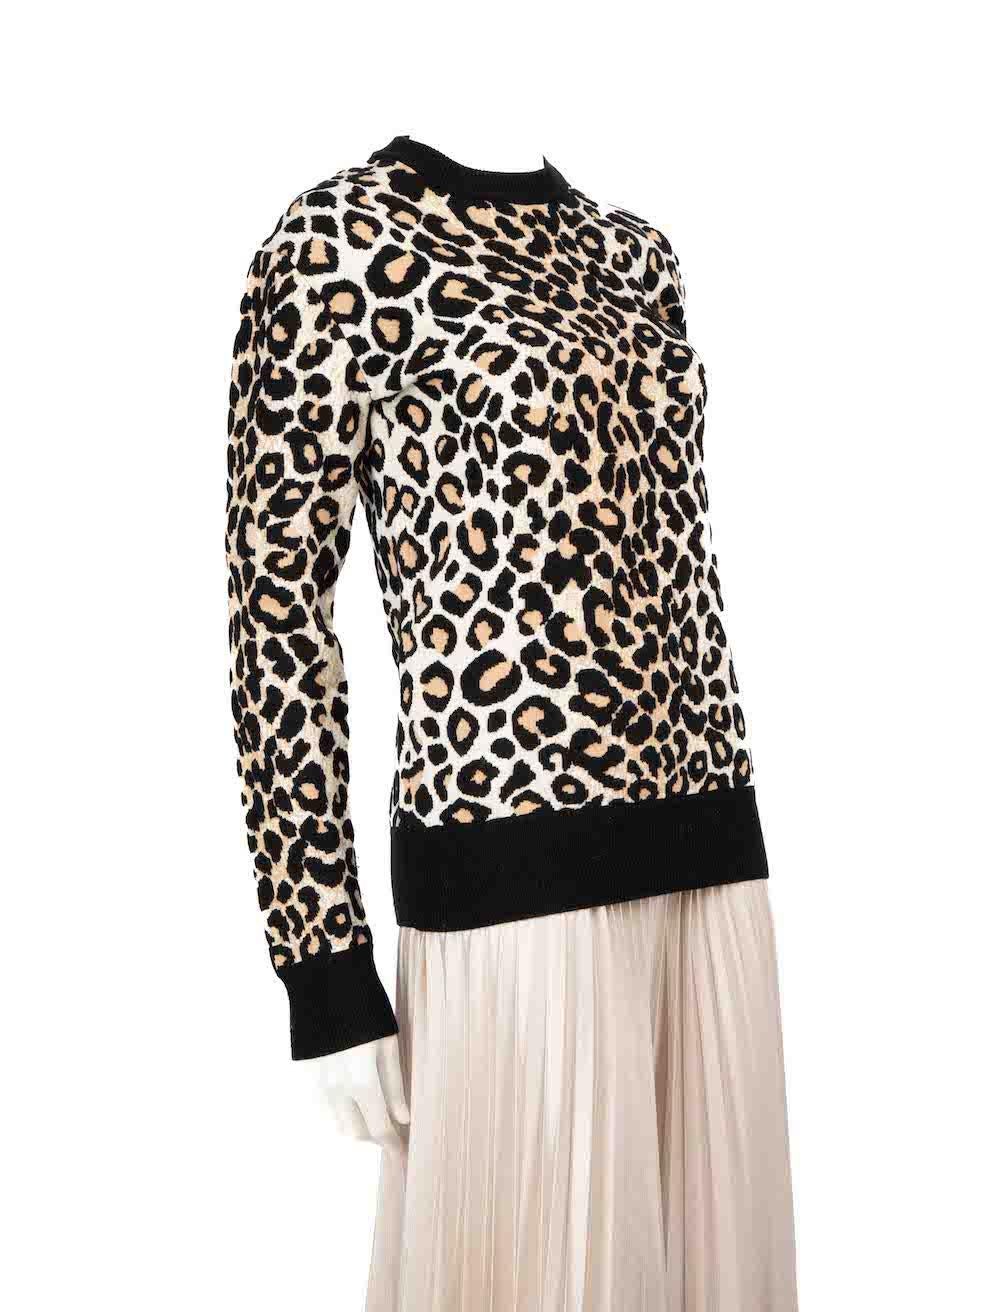 CONDITION is Very good. Hardly any visible wear to the jumper is evident on this used Céline designer resale item.
 
 
 
 Details
 
 
 Beige
 
 Wool
 
 Knit jumper
 
 Leopard print
 
 Long sleeves
 
 Round neck
 
 
 
 
 
 Made in Italy
 
 
 
